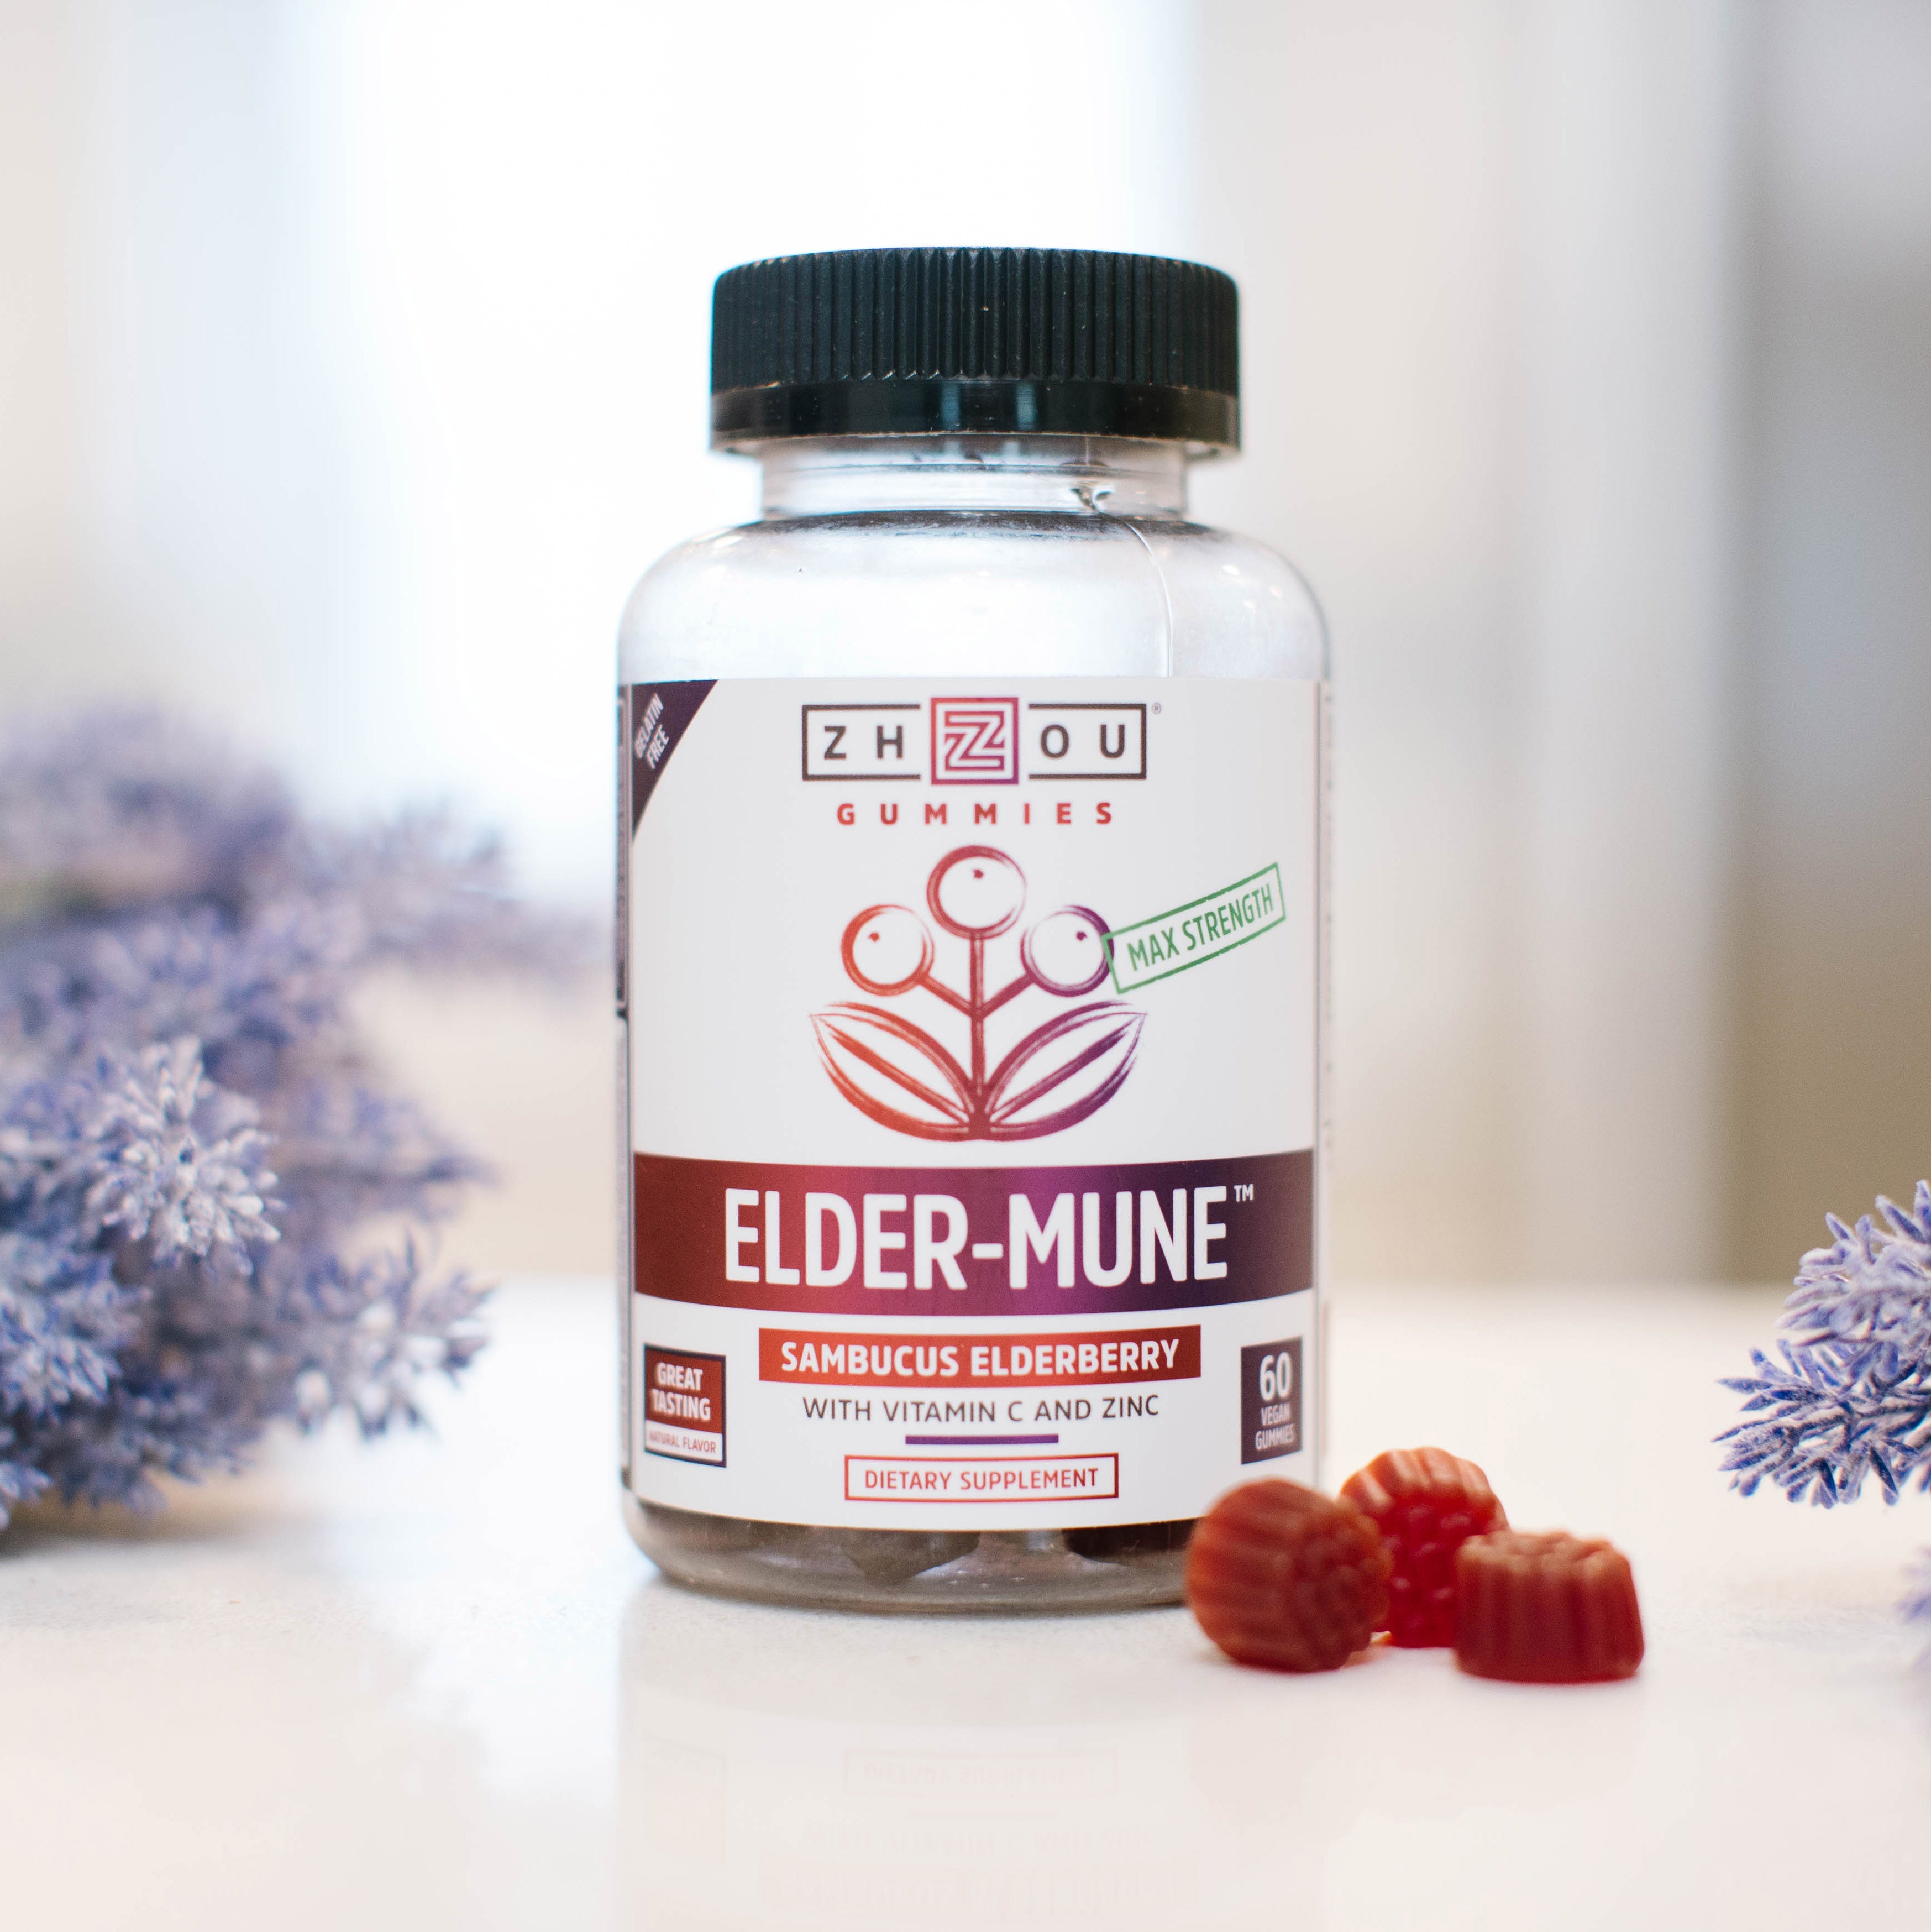 A bottle of Zhou’s Elder-Mune gummies on a white counter with purple flowers surrounding it.